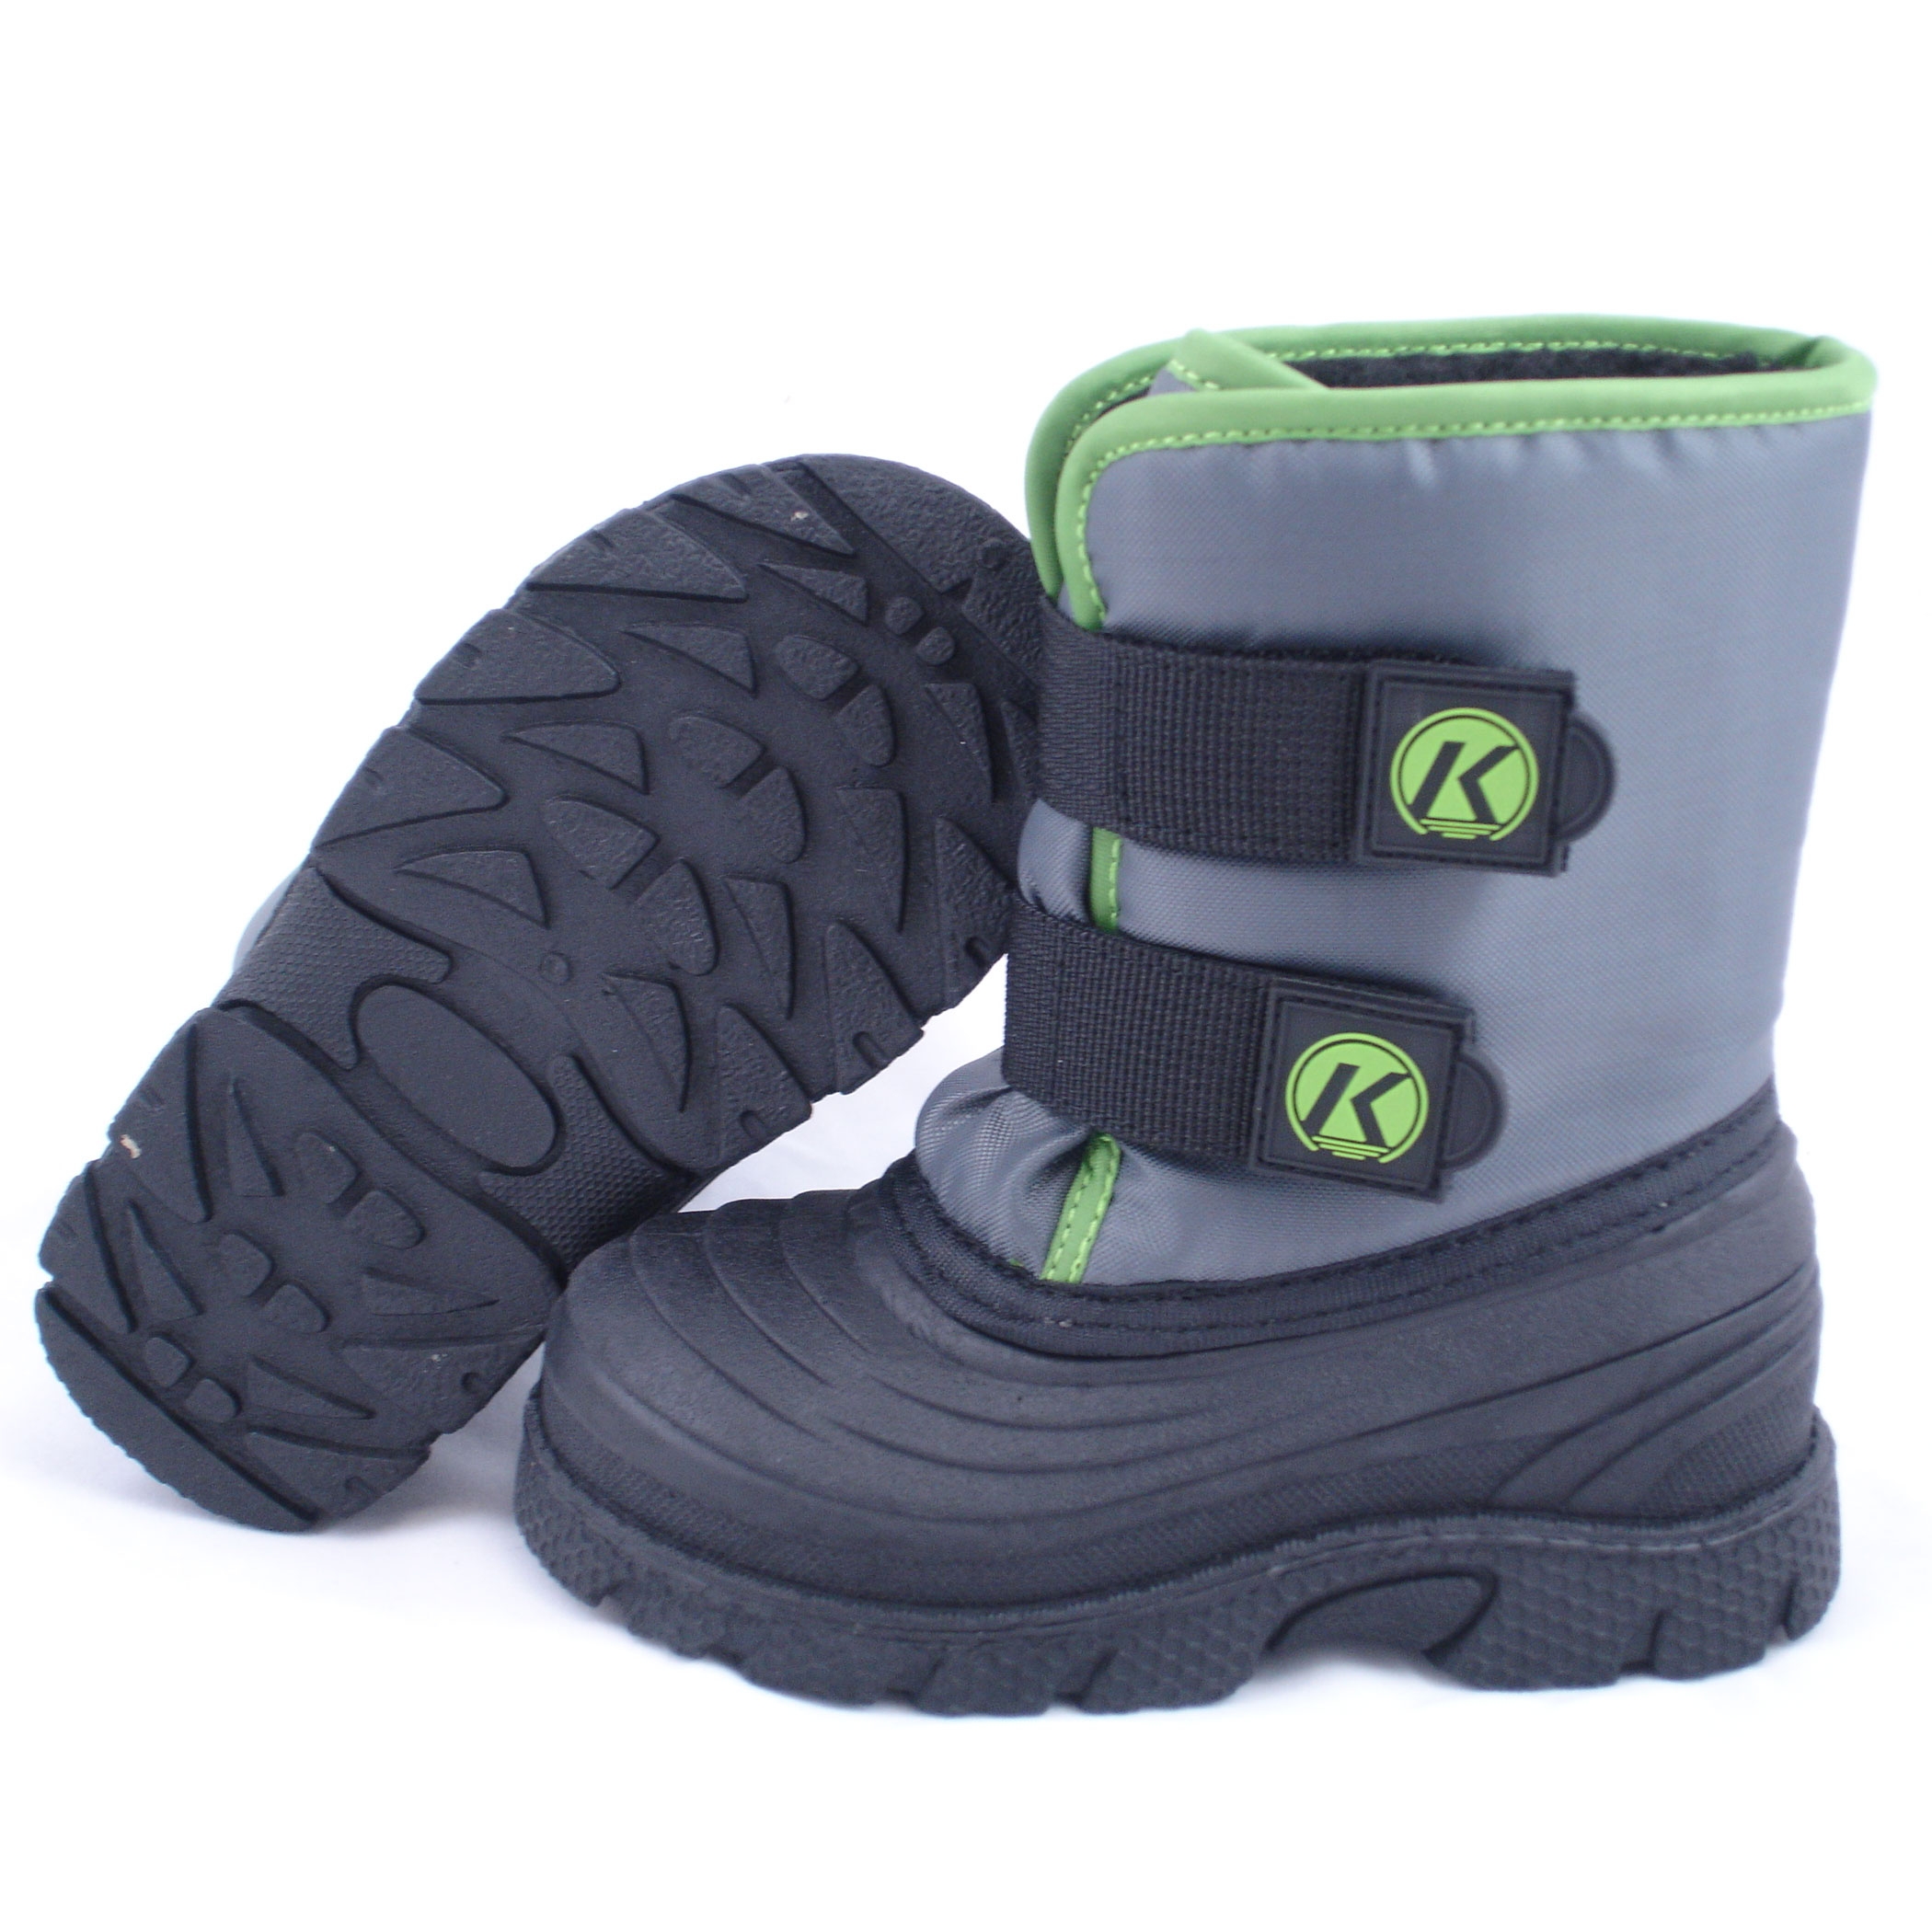 clip art of snow boots - photo #3